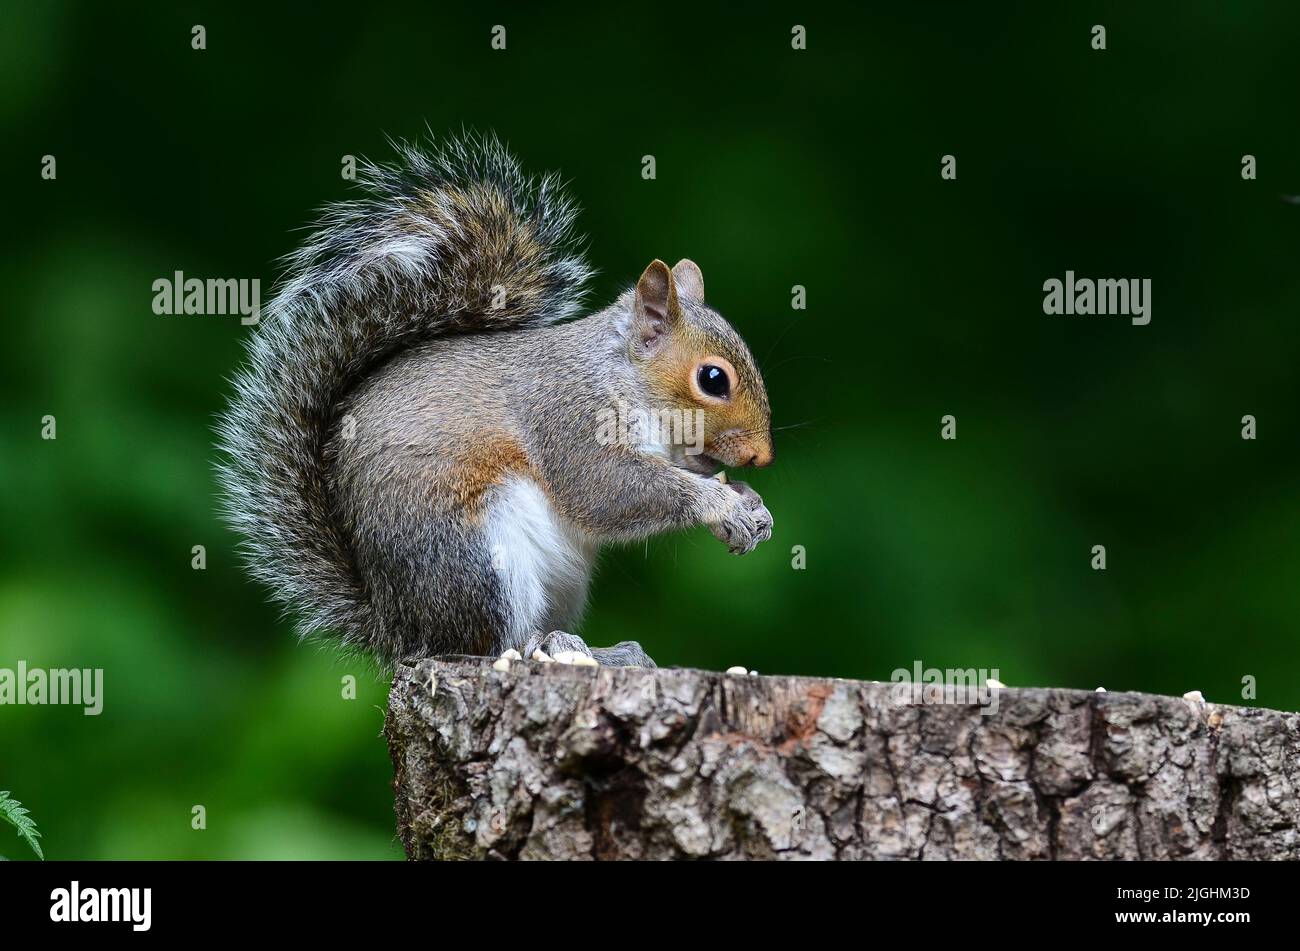 Grey squirrel at rest and feeding on tree stump Stock Photo